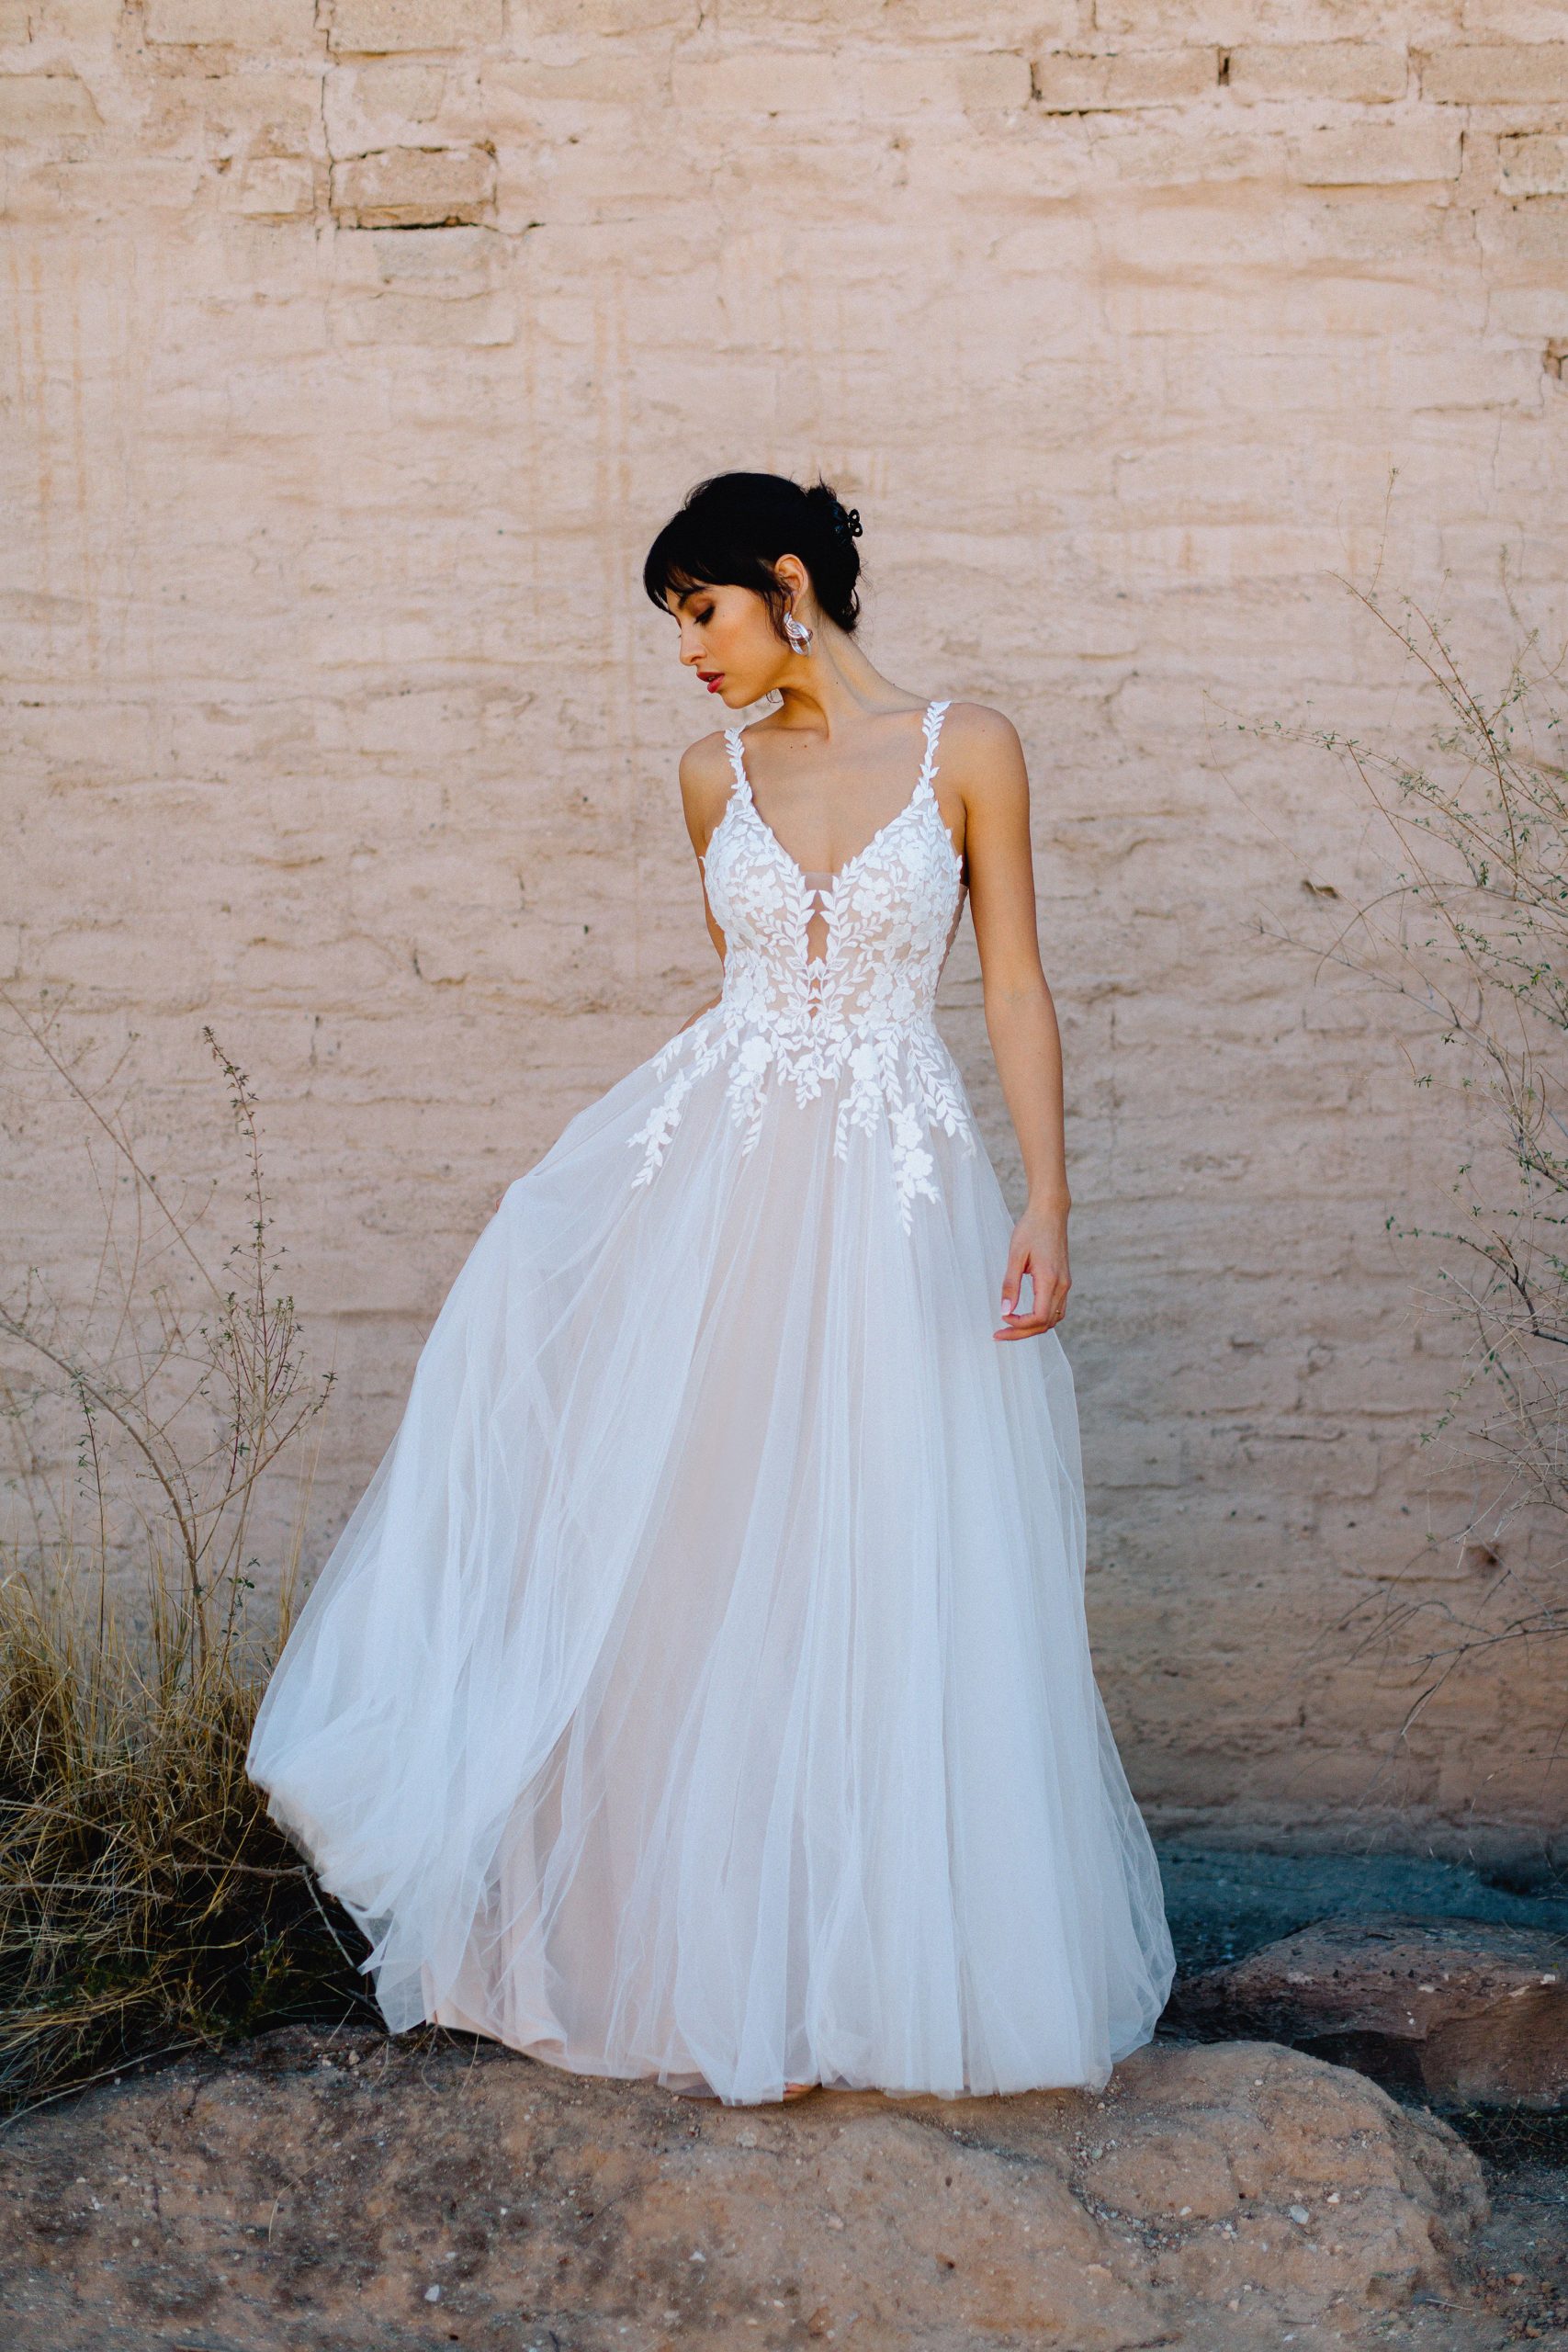 A Beautiful Feminine, Romantic and Lightweight Wedding Dress. Lace Sleeveless V-Neck Bodice with a Simple Flowy, super light, layered tulle A-Line Wedding Dress.  Featuring Buttons down the entire back/train. Low, detailed back adds the WOW.